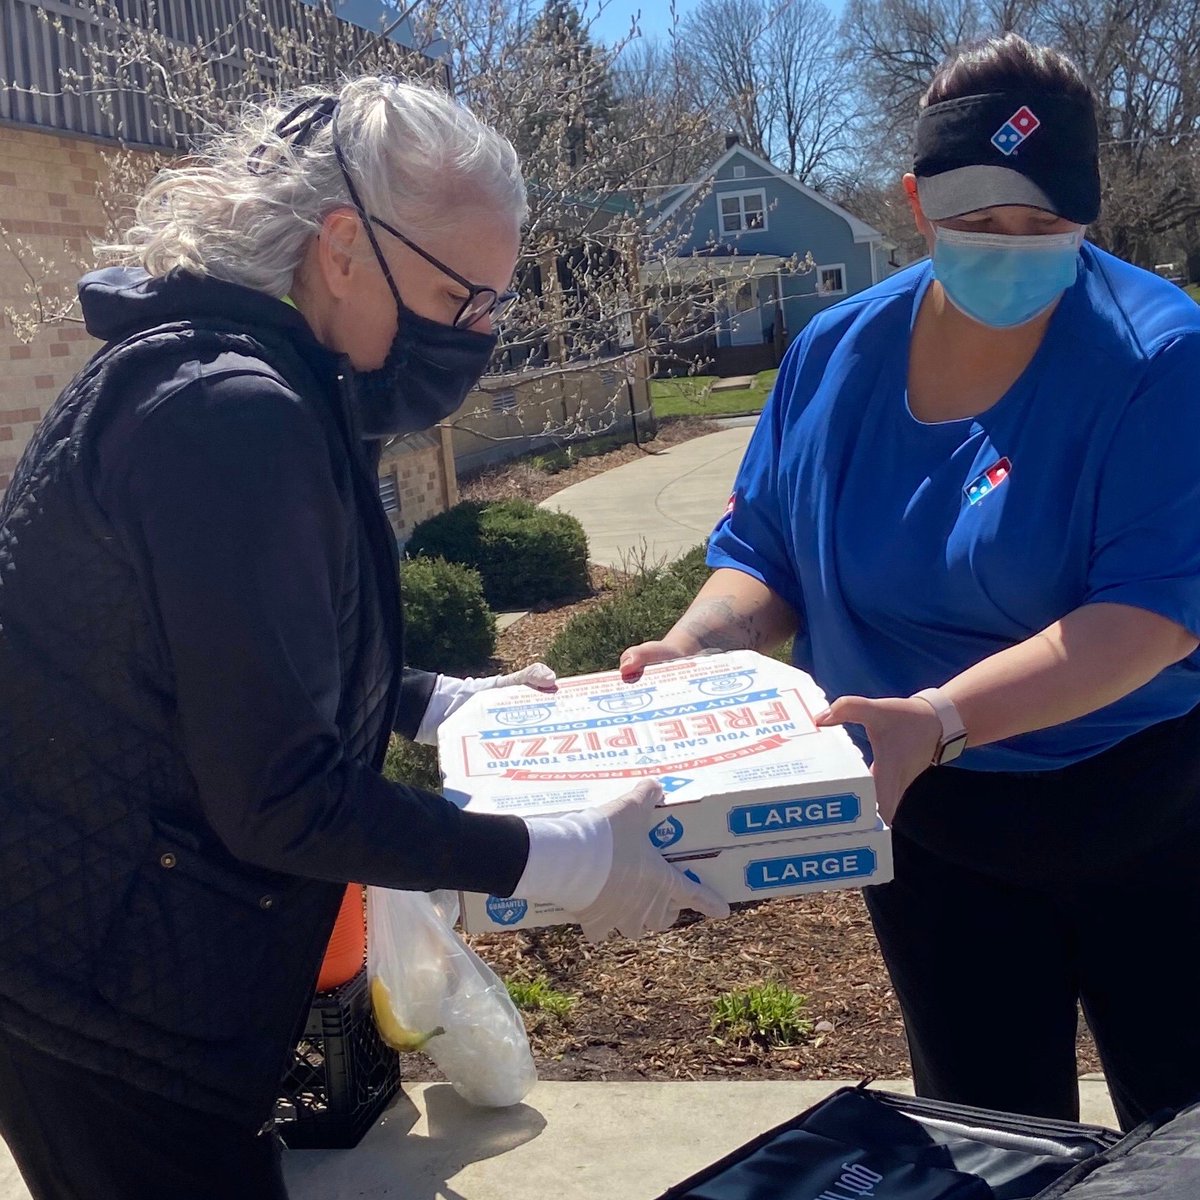 A Special Shout-Out and Thank You to Domino's Pizza at 204 Park Avenue. They delivered 260 pizzas to our students on Tuesday, April 21. They coordinated this generous gift with our District and it occurred during our daily meal distribution. The smiles were priceless.